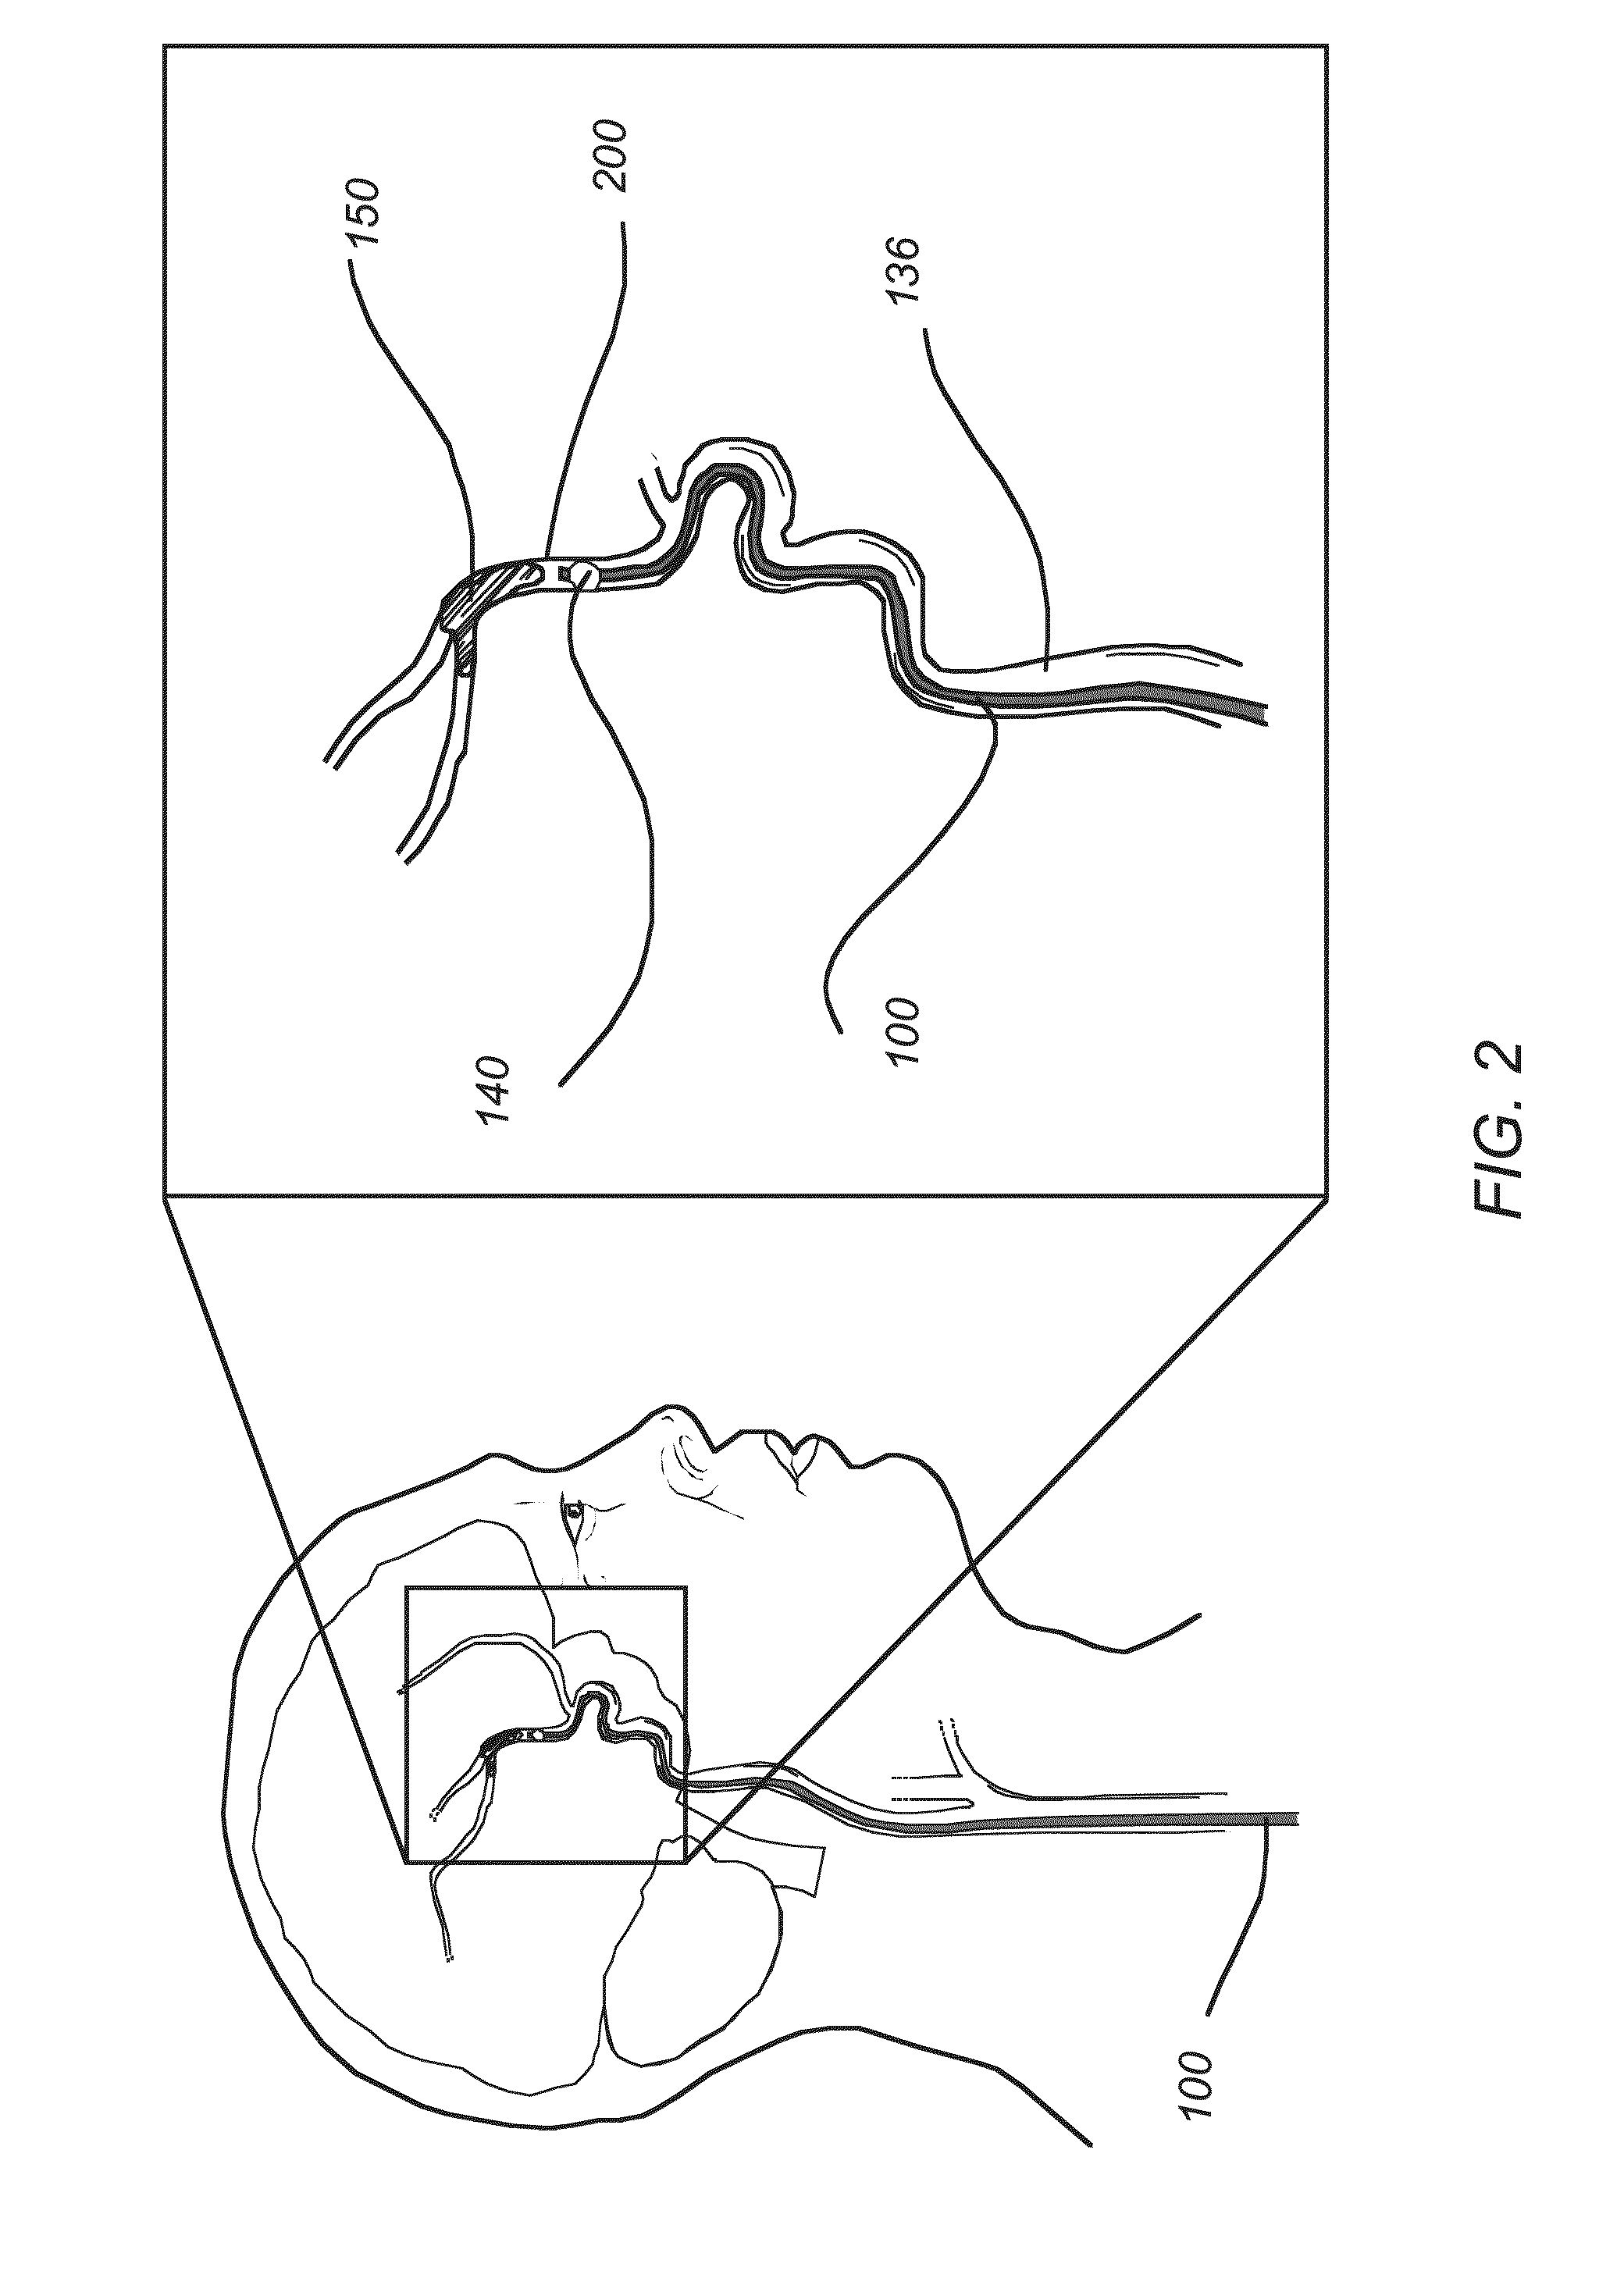 Post-conditioning suction catheter apparatus and methods